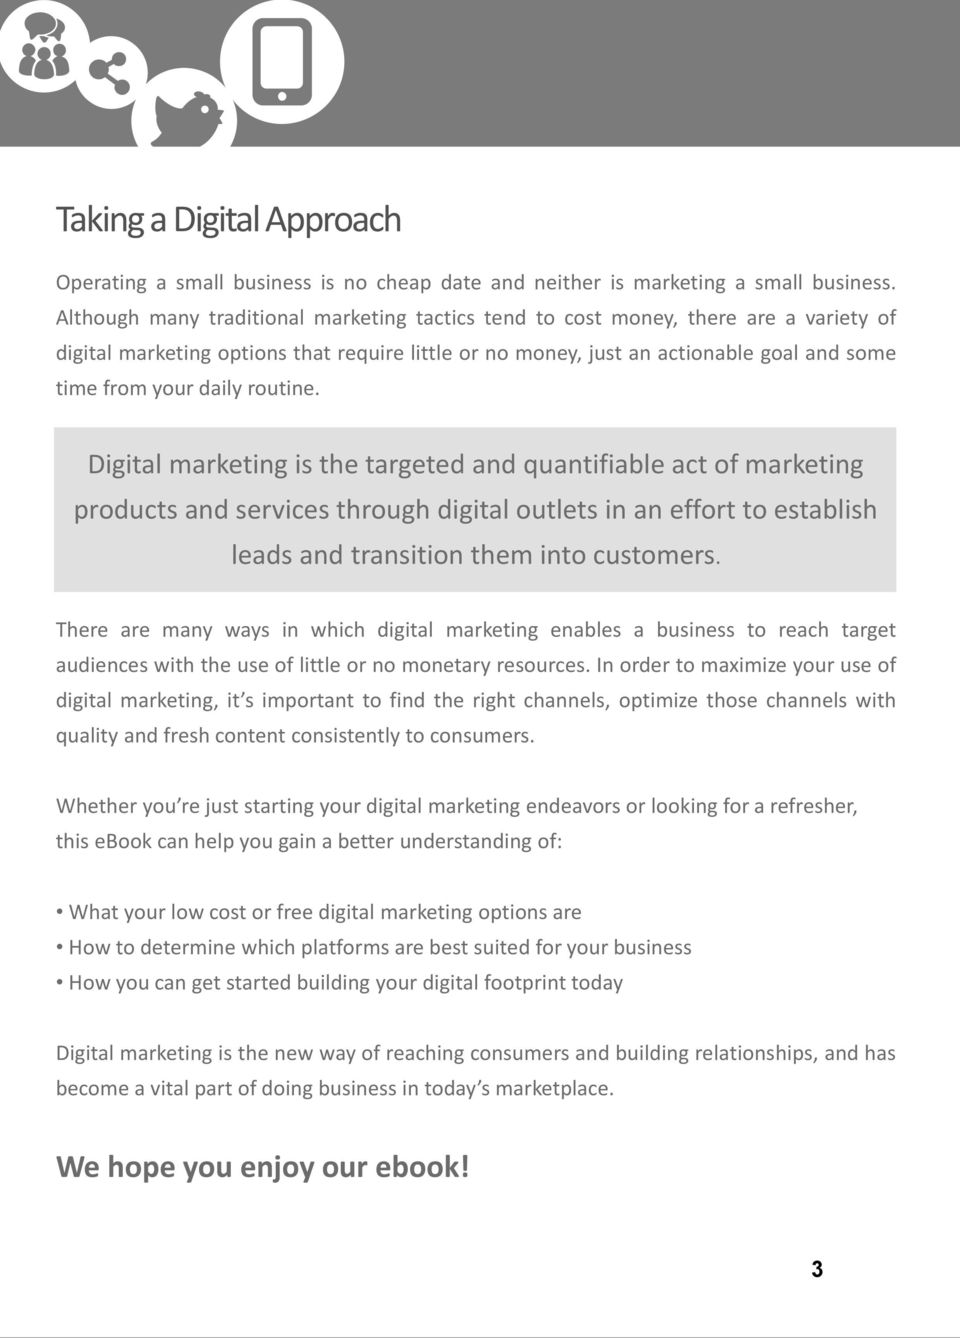 routine. Digital marketing is the targeted and quantifiable act of marketing products and services through digital outlets in an effort to establish leads and transition them into customers.